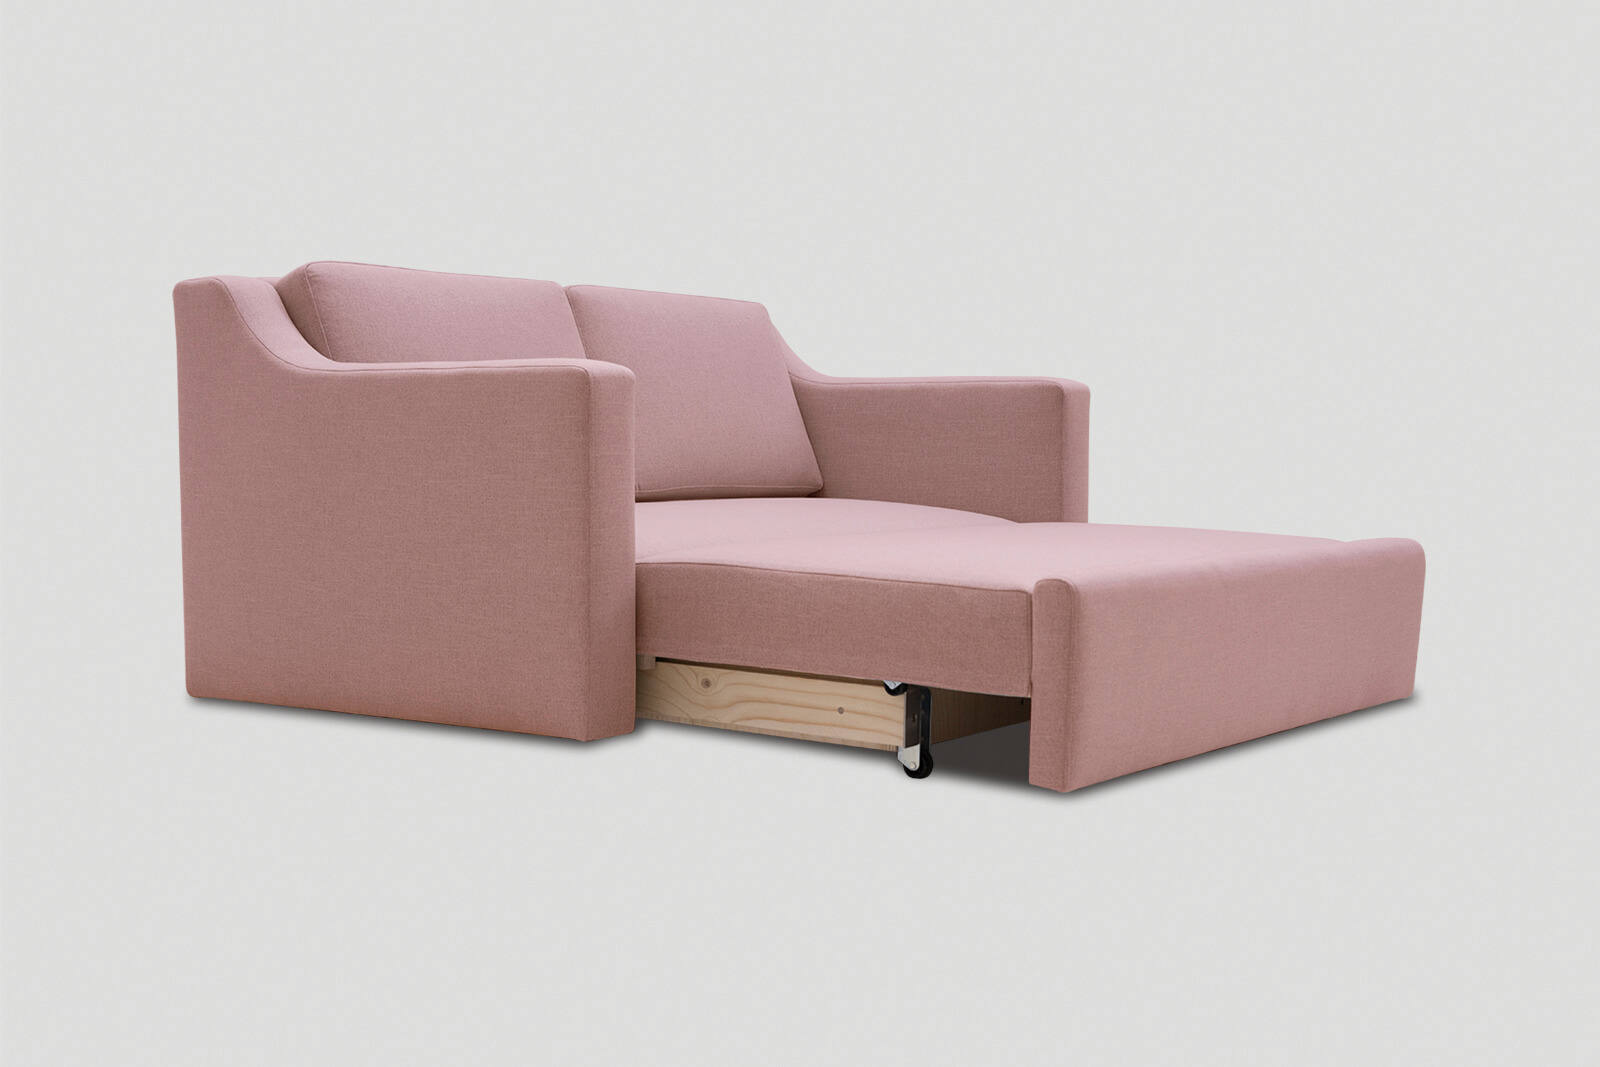 HBSB02-double-sofa-bed-rosewater-3q-daybed